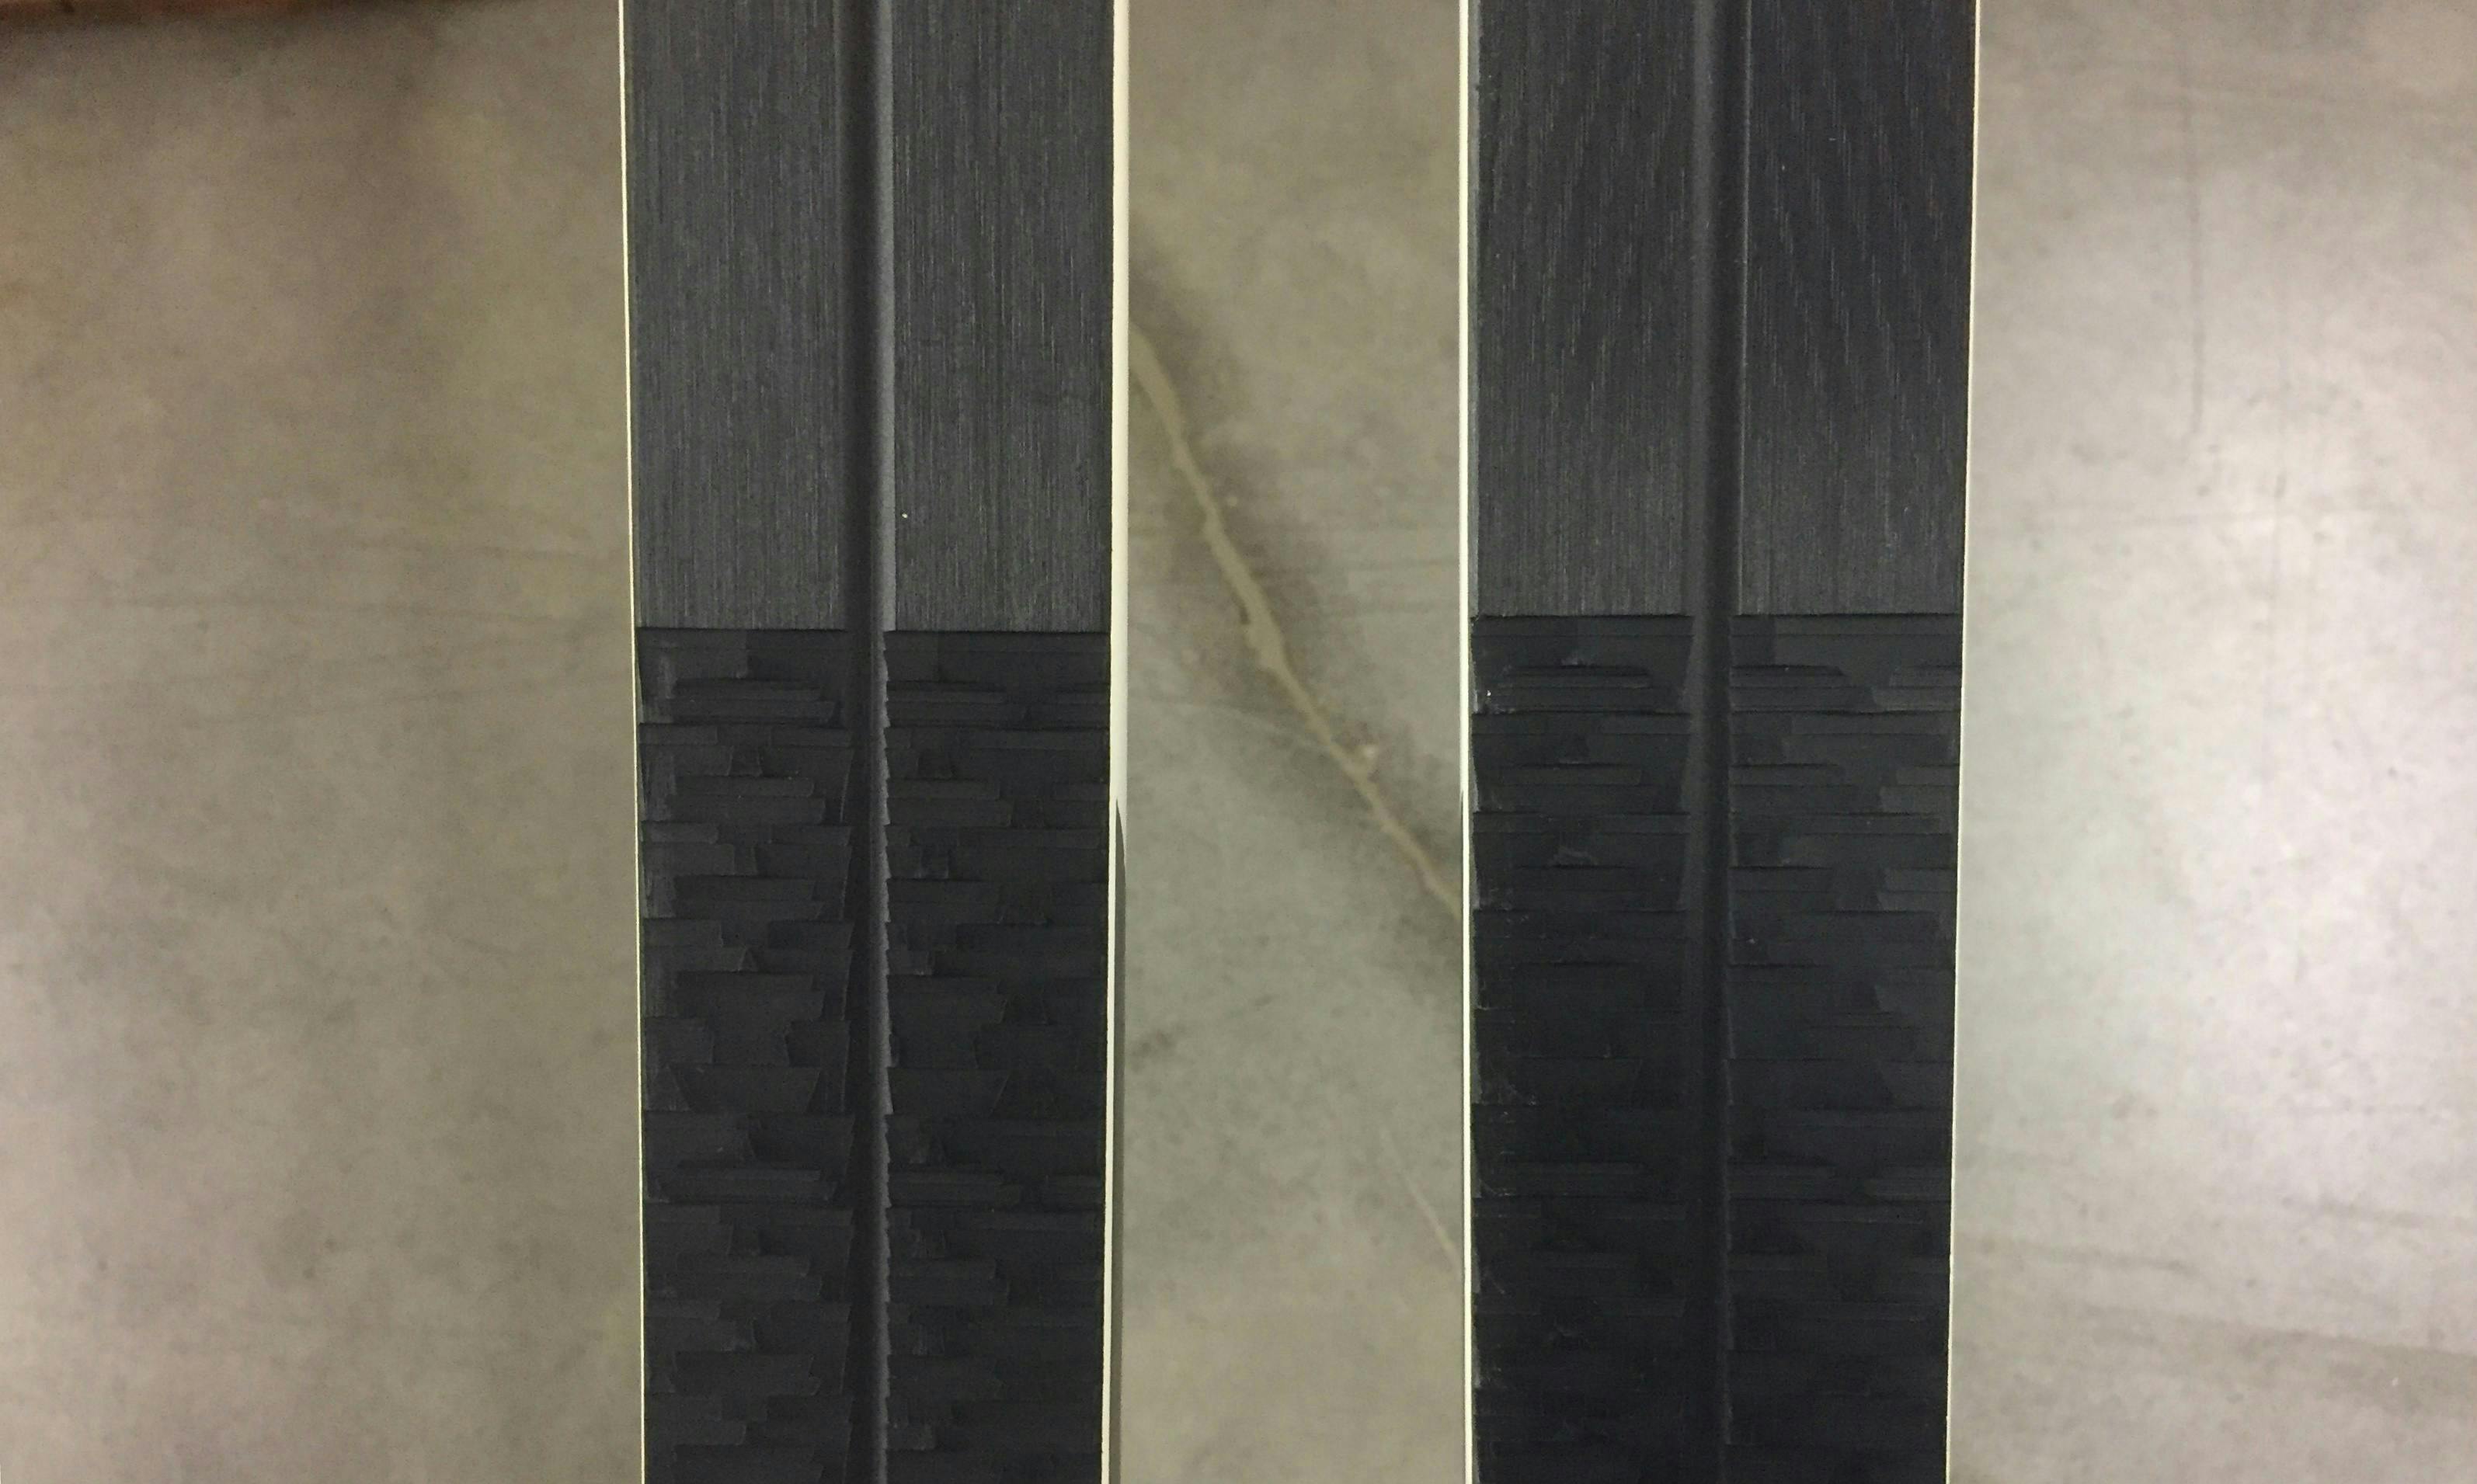 A close-up look at the pattern on the base of a pair of waxless skis